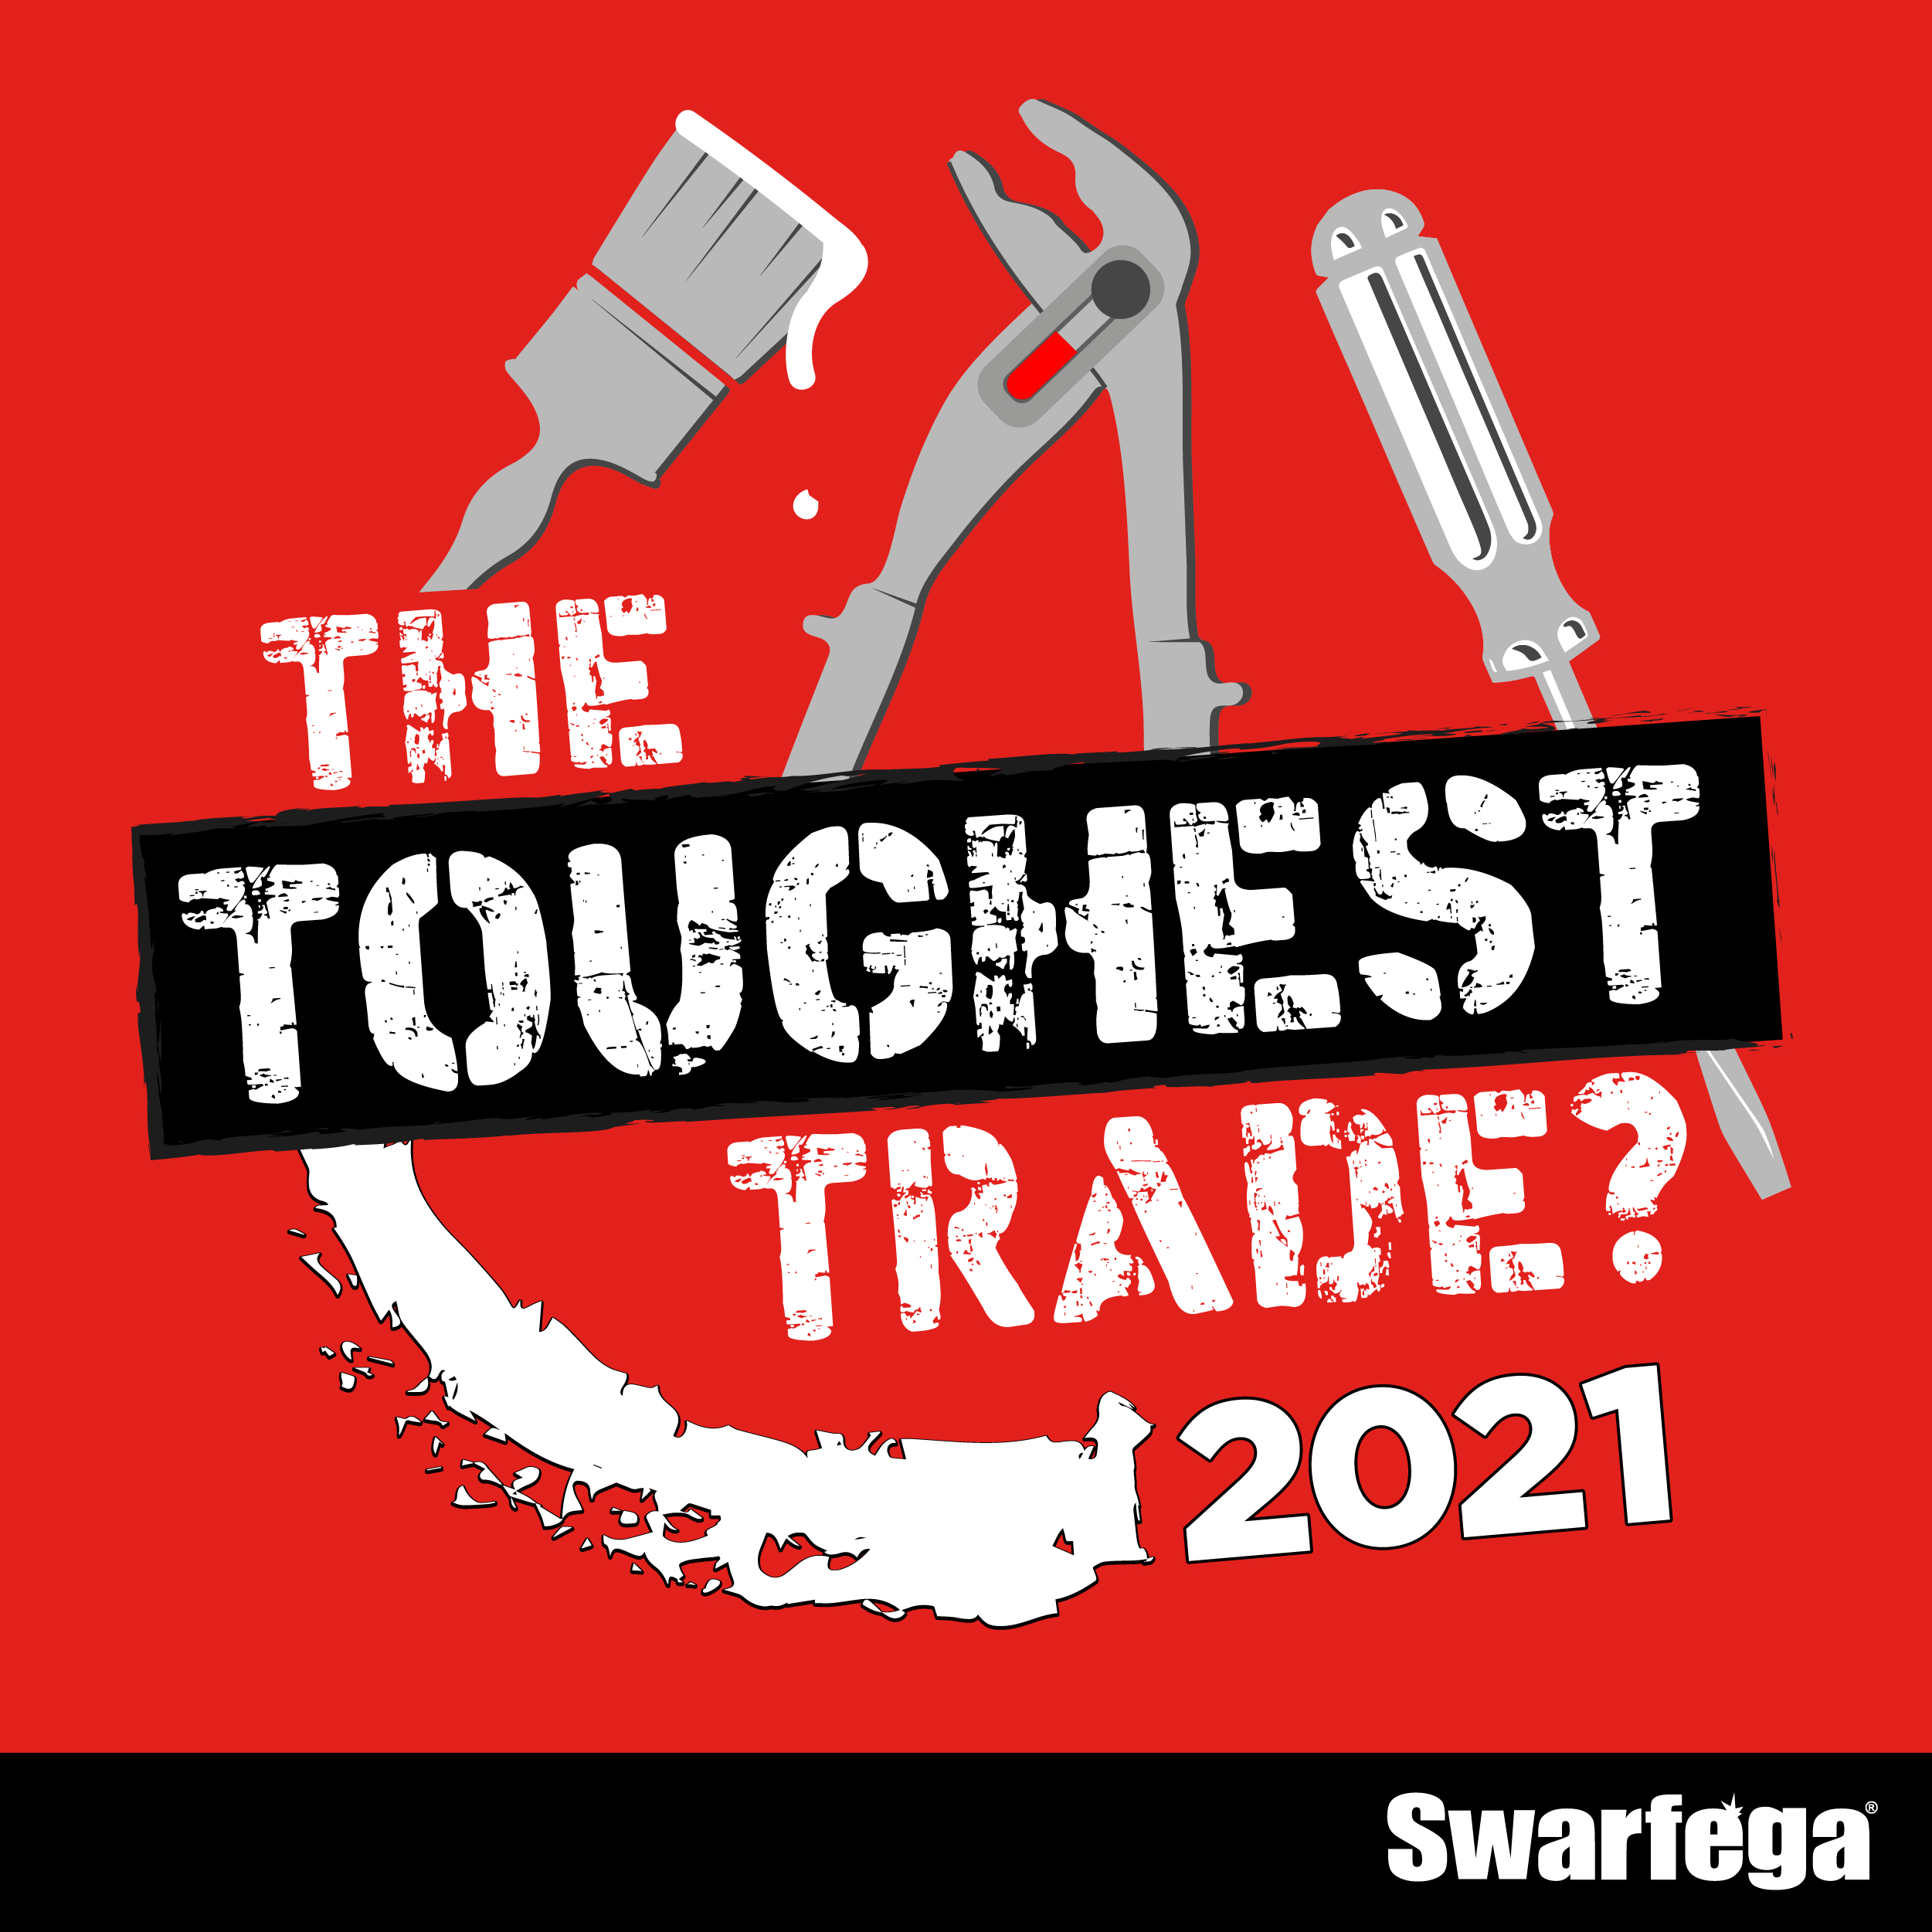 Swarfega’s fourth hunt for the Toughest Trade in the UK